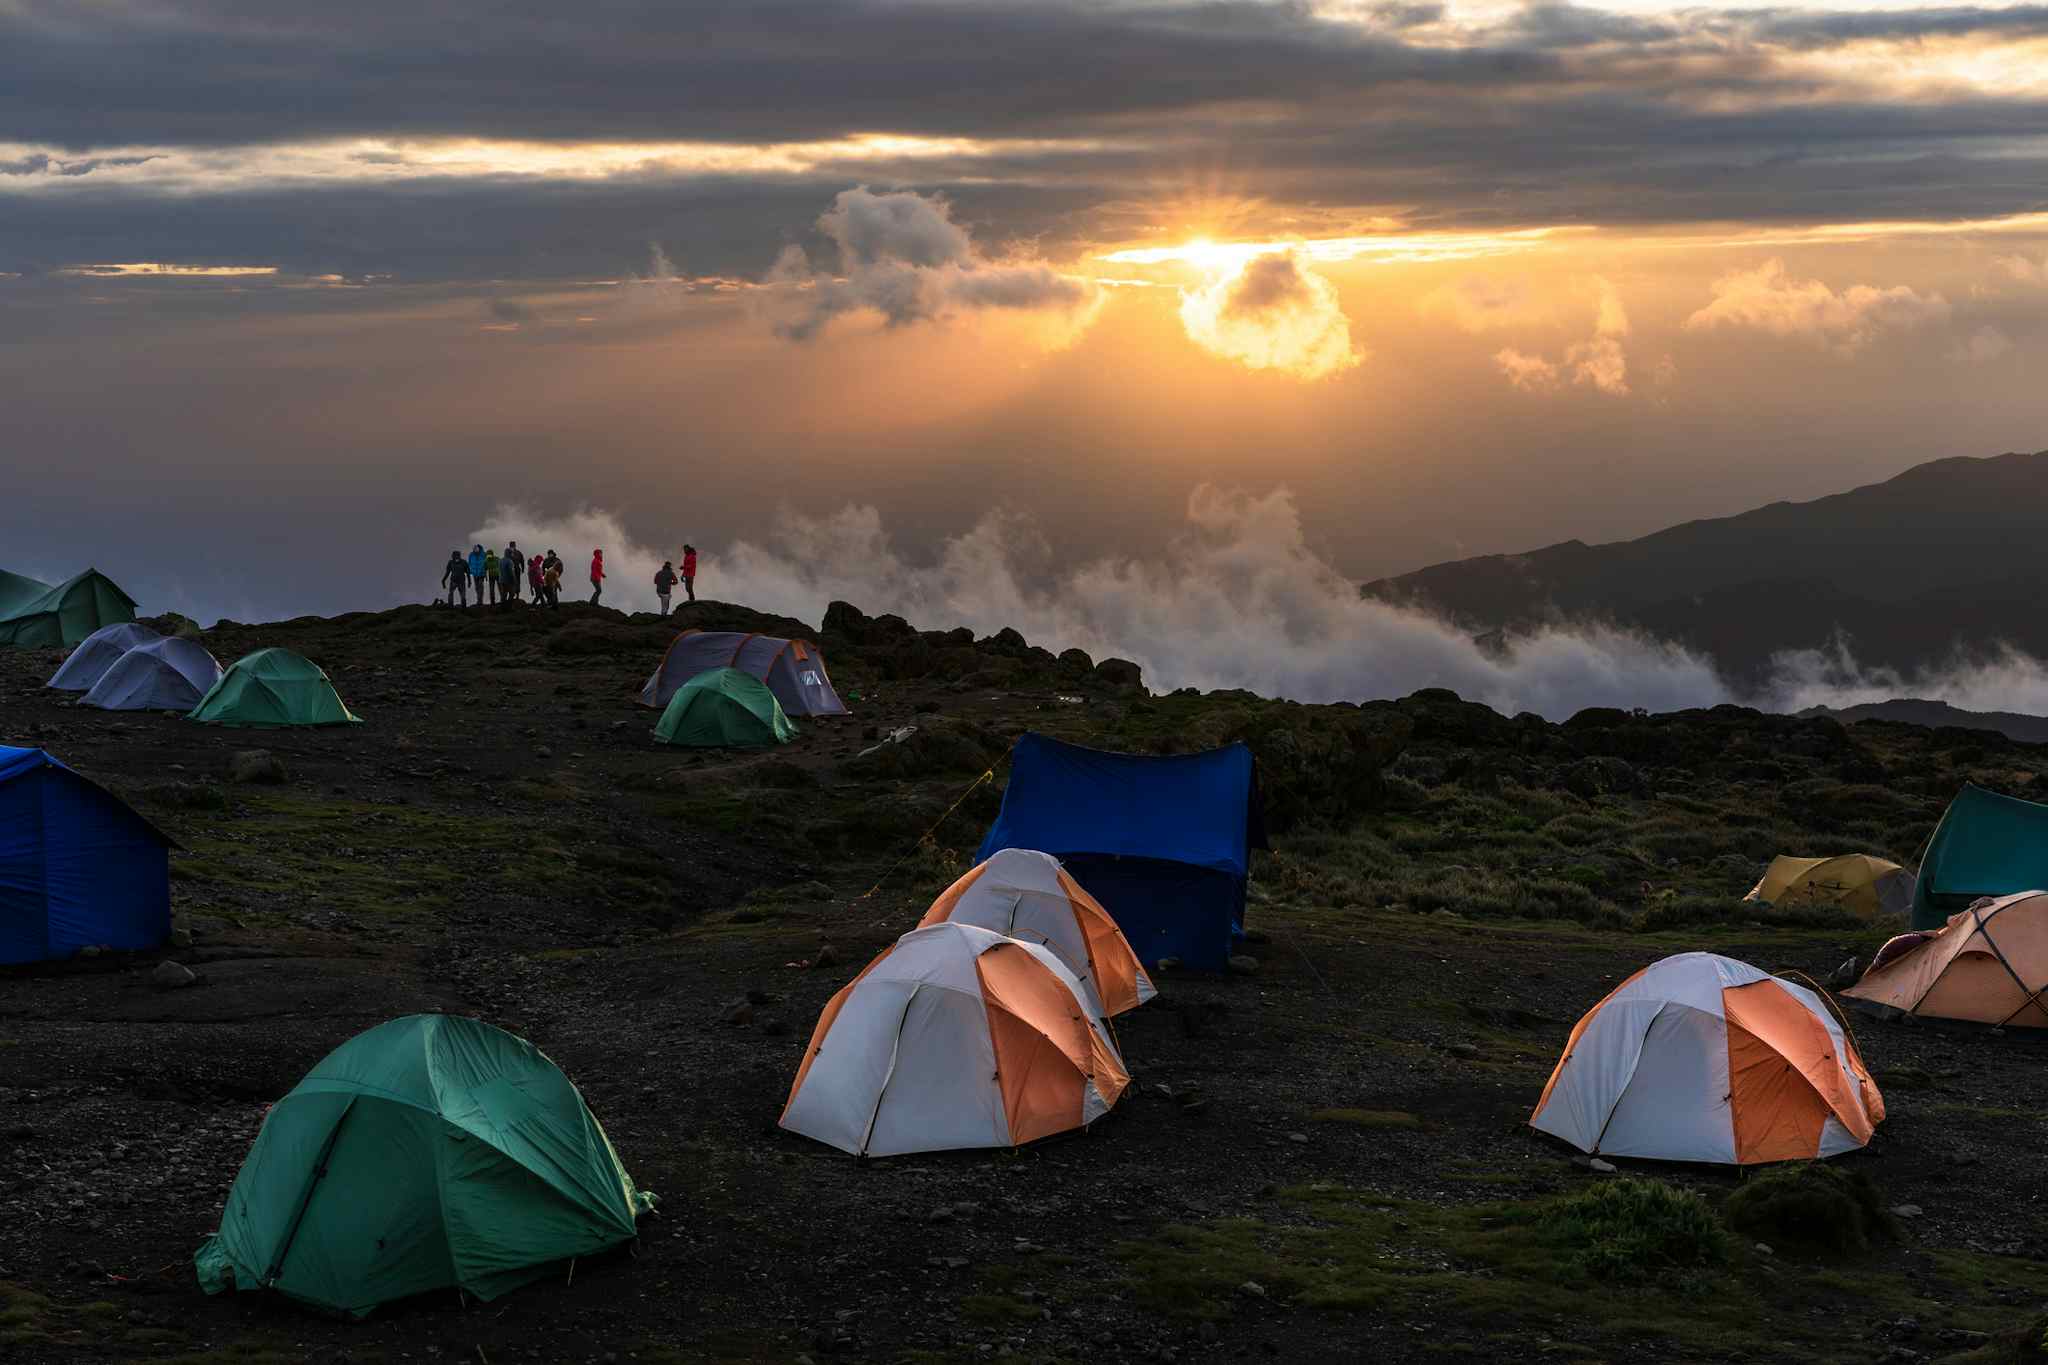 People watching the sun set from Shira Camp, Kilimanjaro, with tents in the foreground.